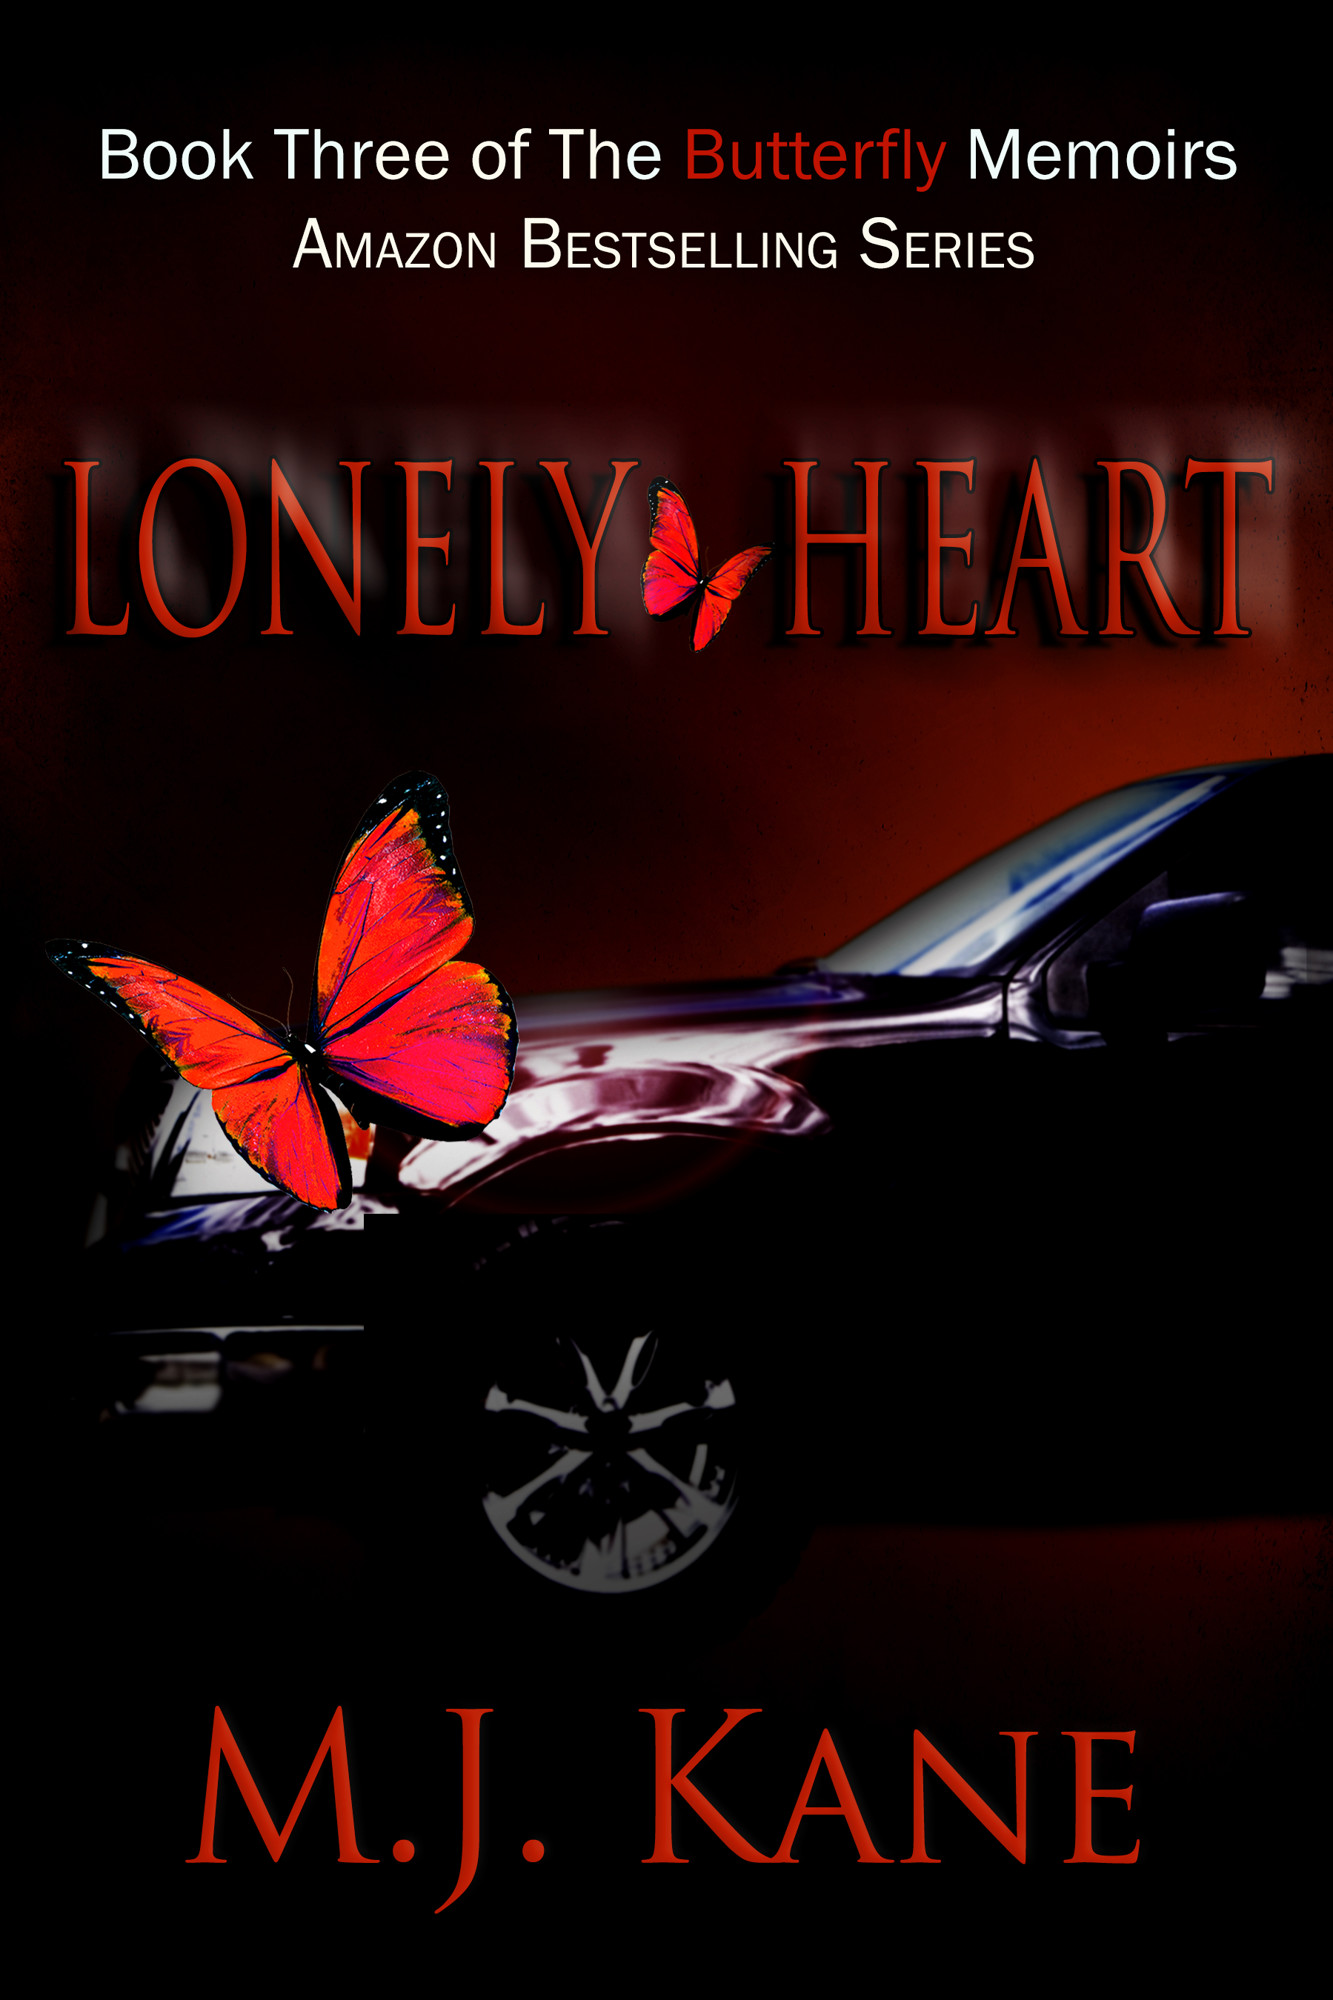 Lonely Heart by M.J. Kane